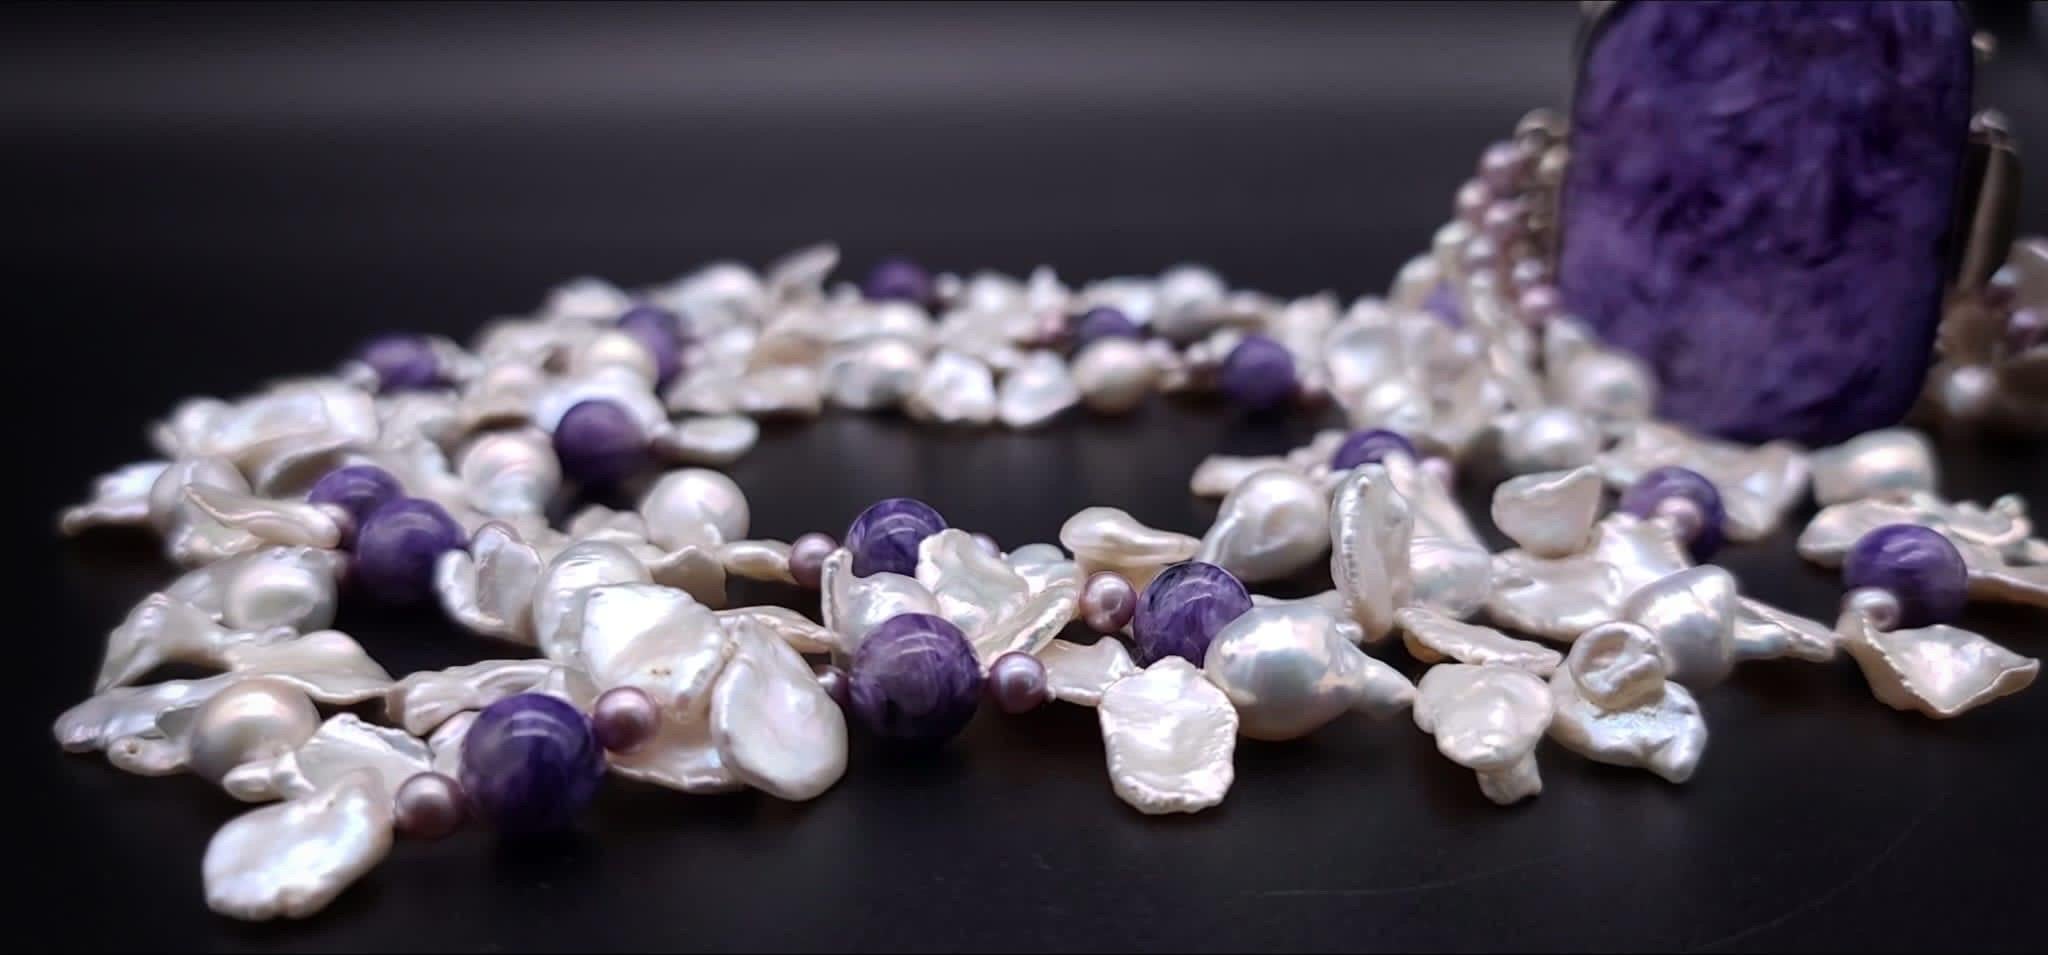 Mixed Cut A.Jeschel Luxury Keshy Pearls with a signature Charoite clasp necklace. For Sale